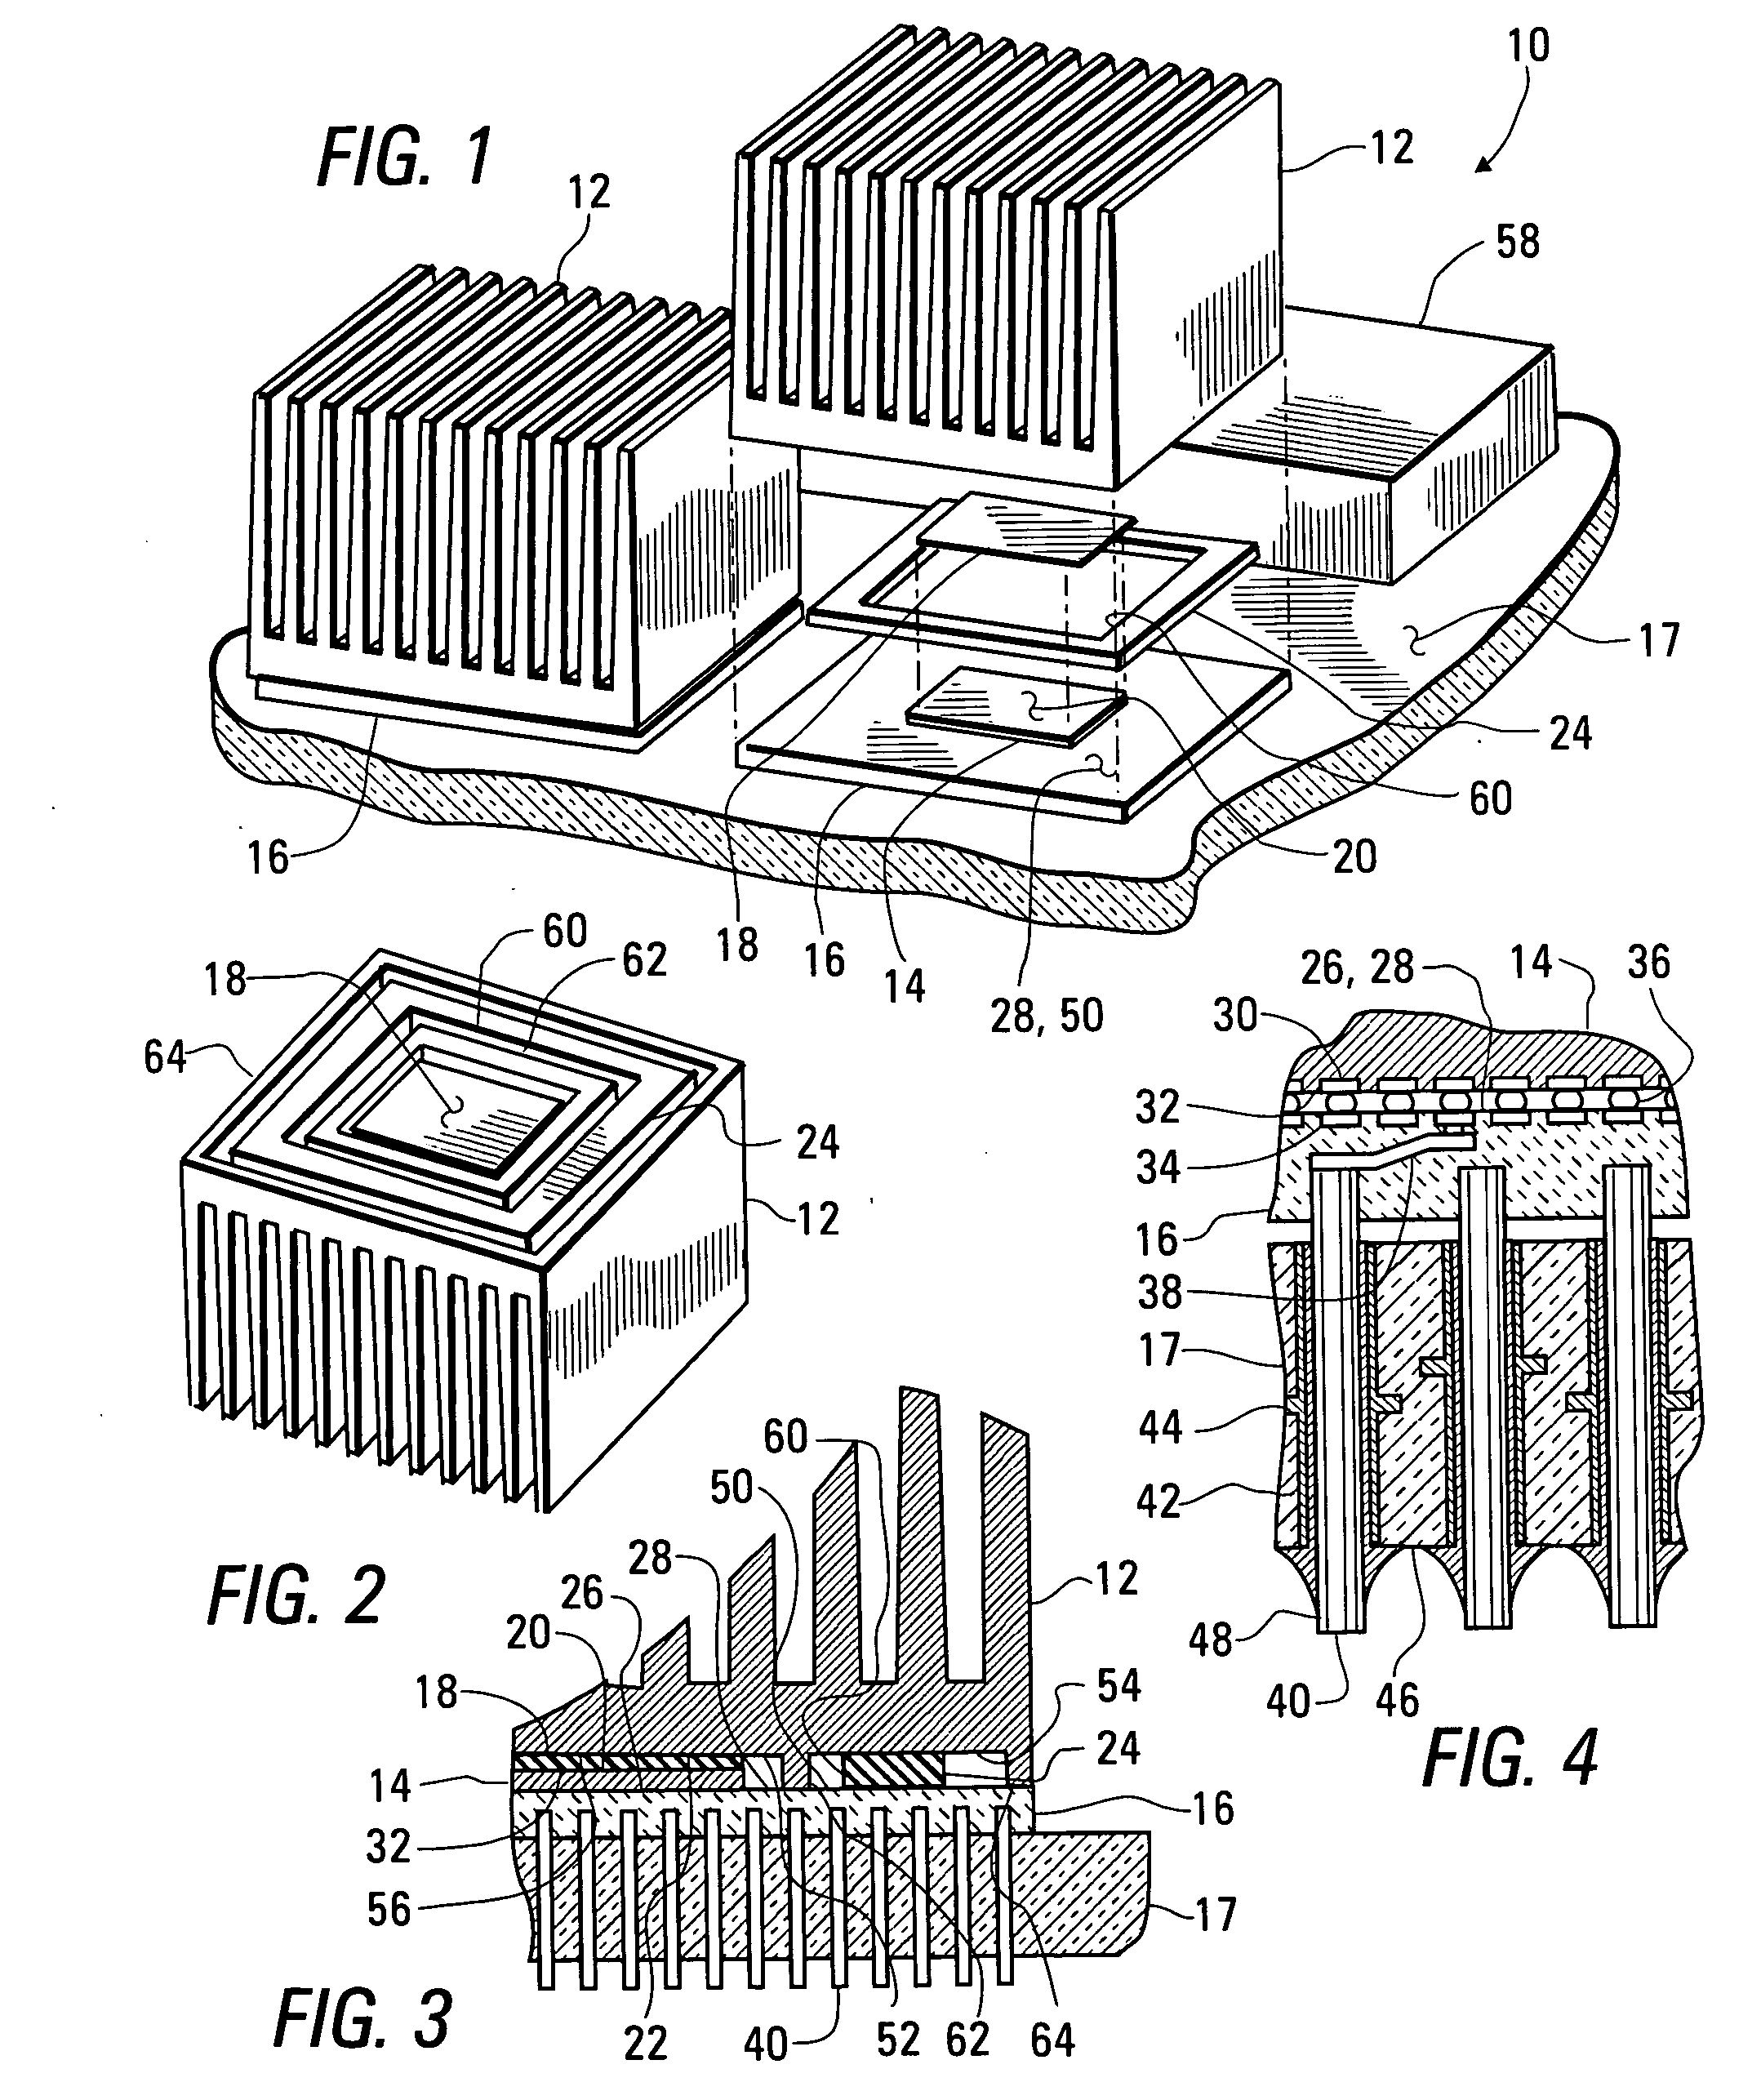 Apparatus and method for attaching a heat sink to an integrated circuit module